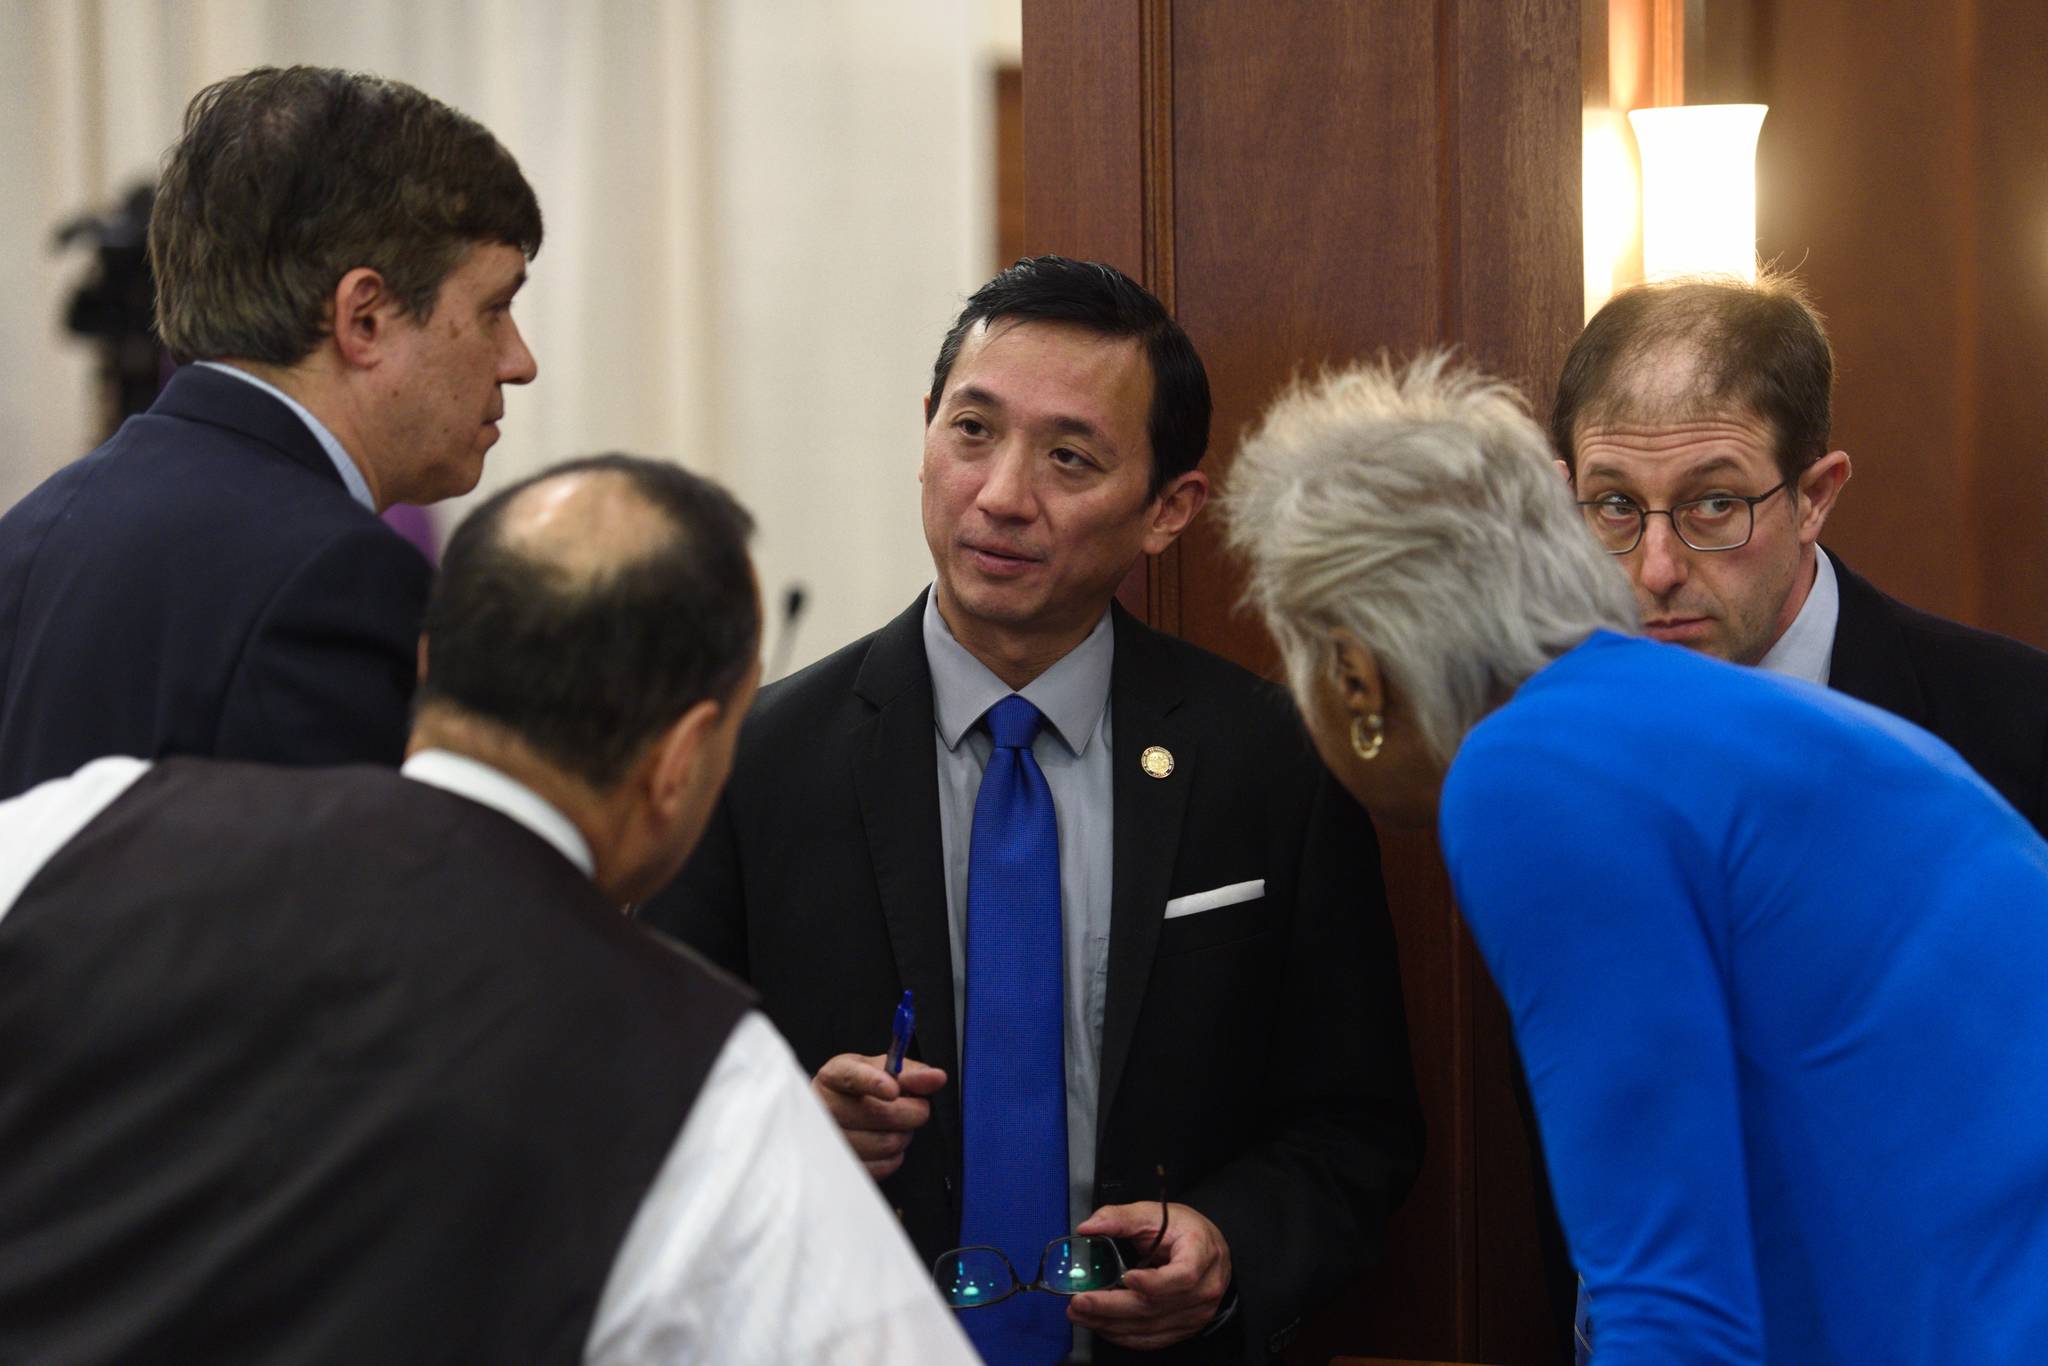 Senate Minority members caucus during debate on the size of the Alaska Permanent Fund Dividend in the Alaska Senate on Tuesday, June 4, 2019. (Michael Penn | Juneau Empire)